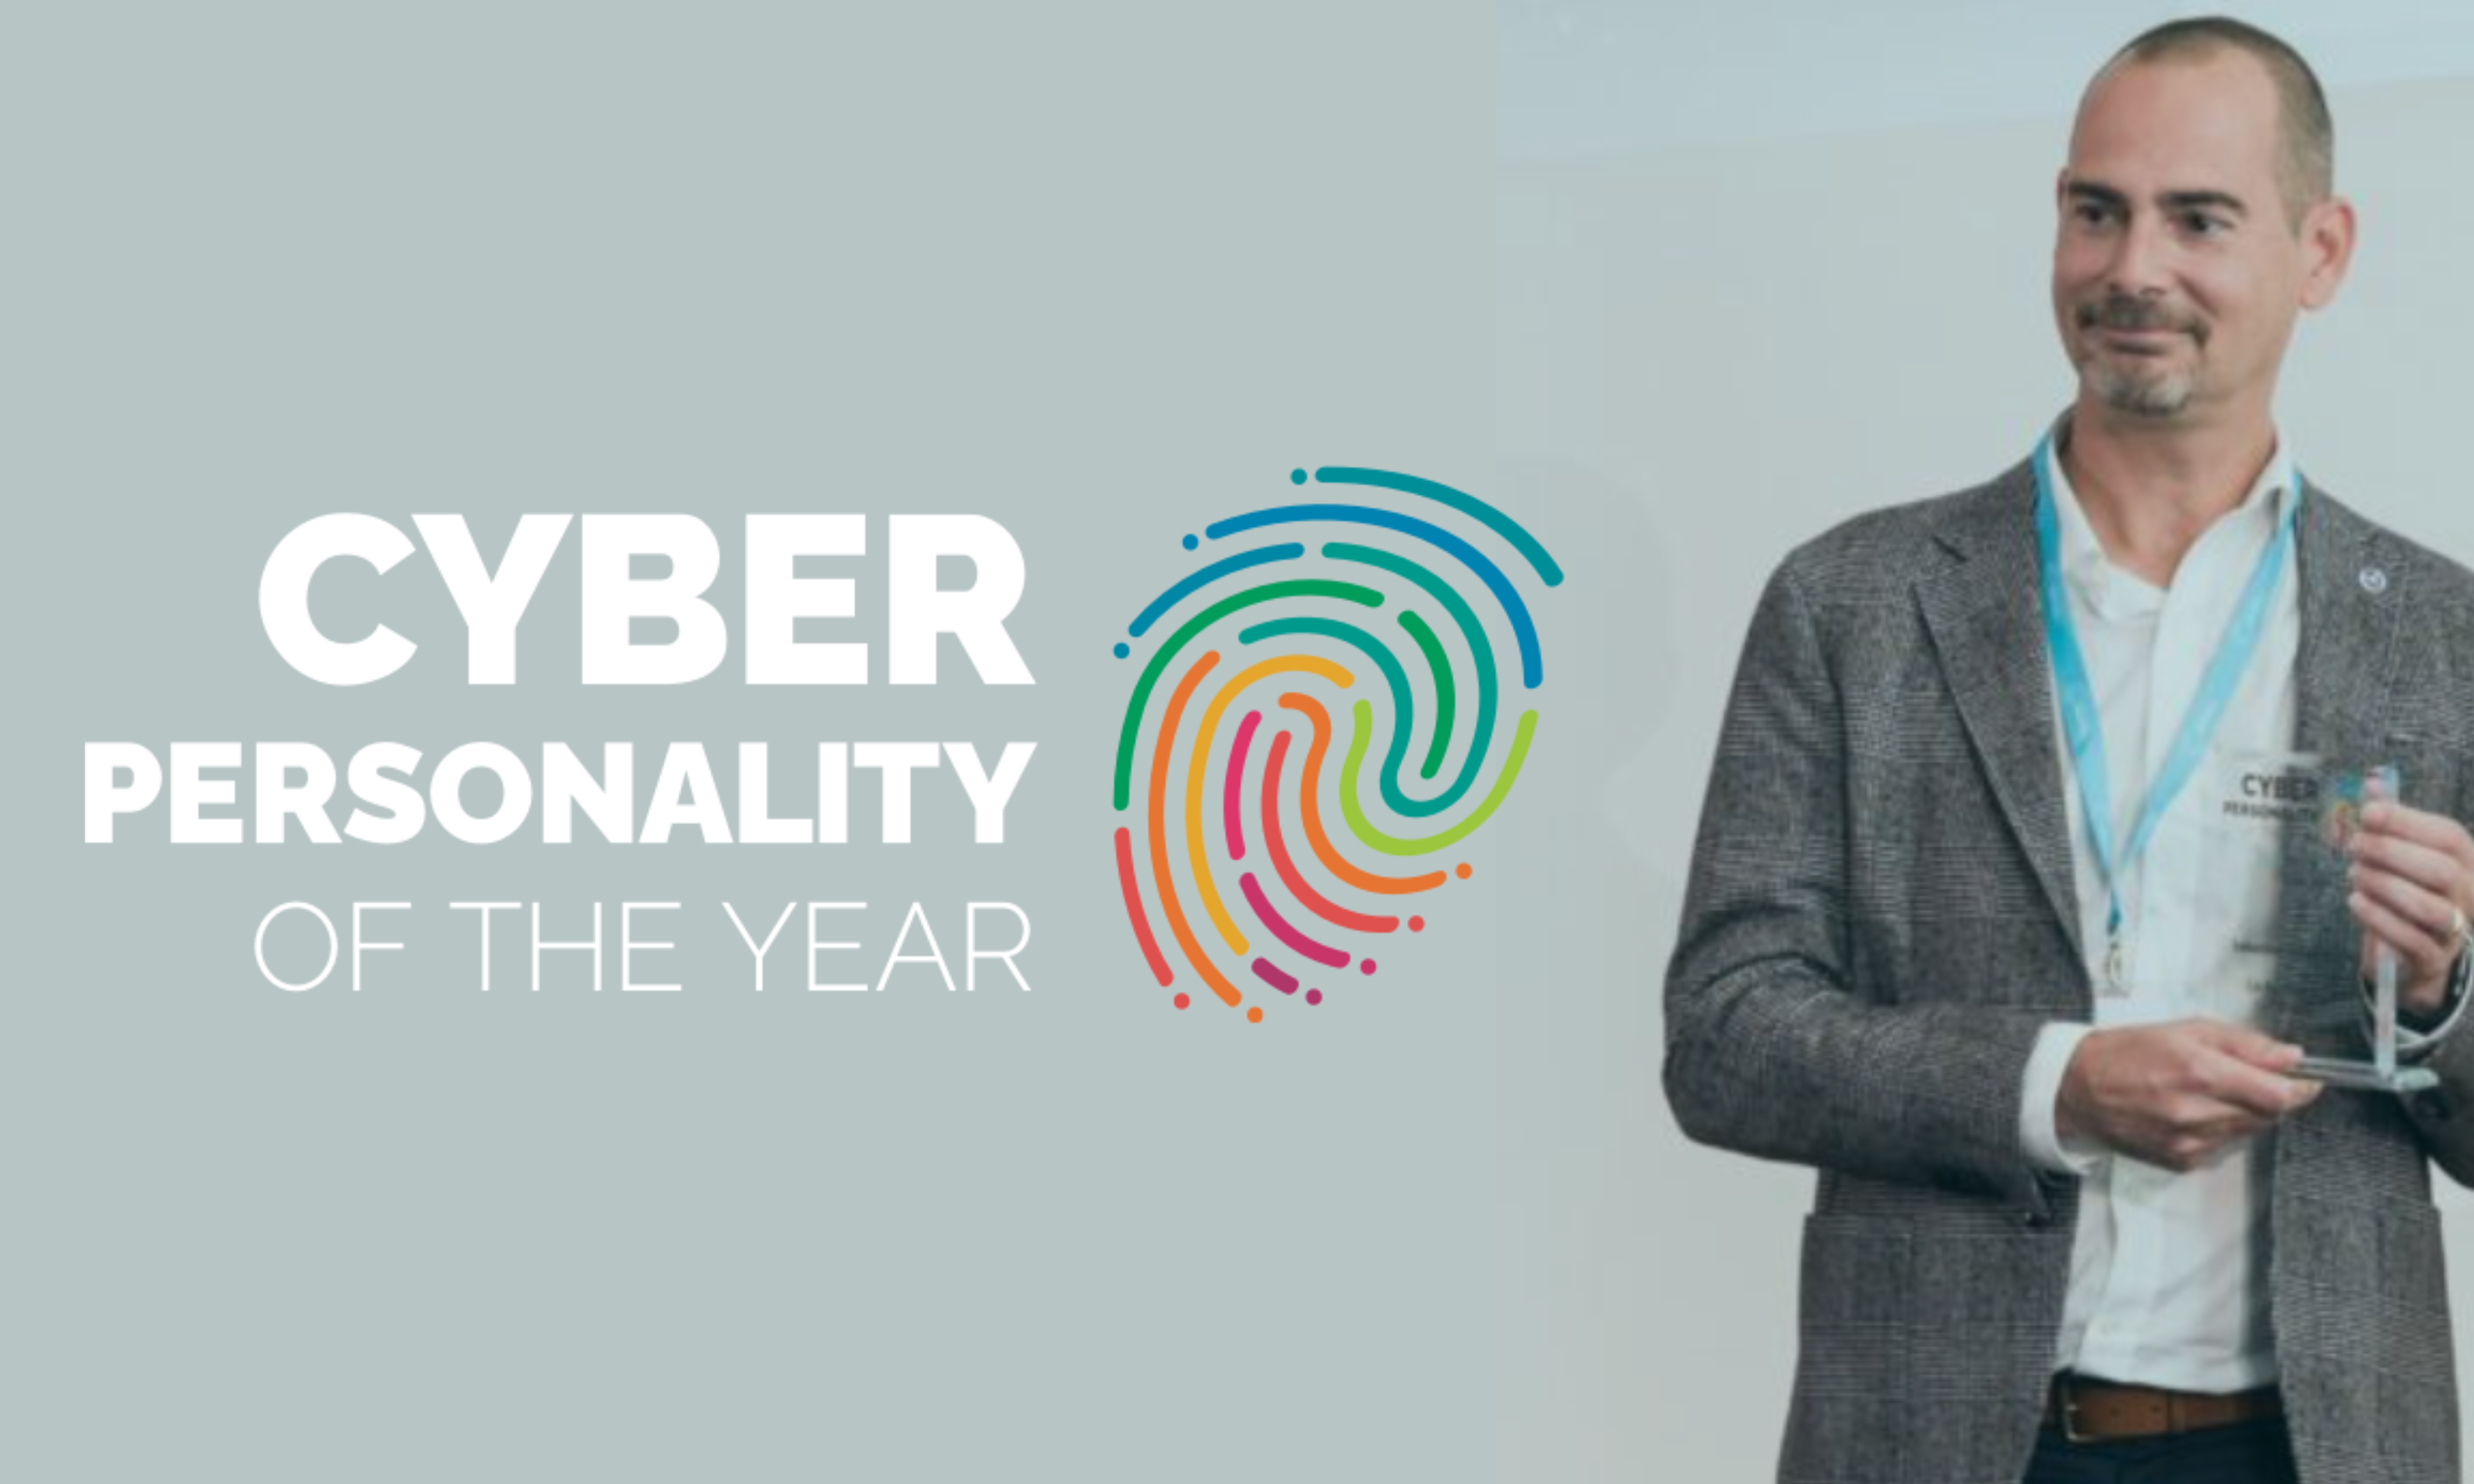 Sebastien Deleersnyder is the Cybersecurity Personality of 2022!